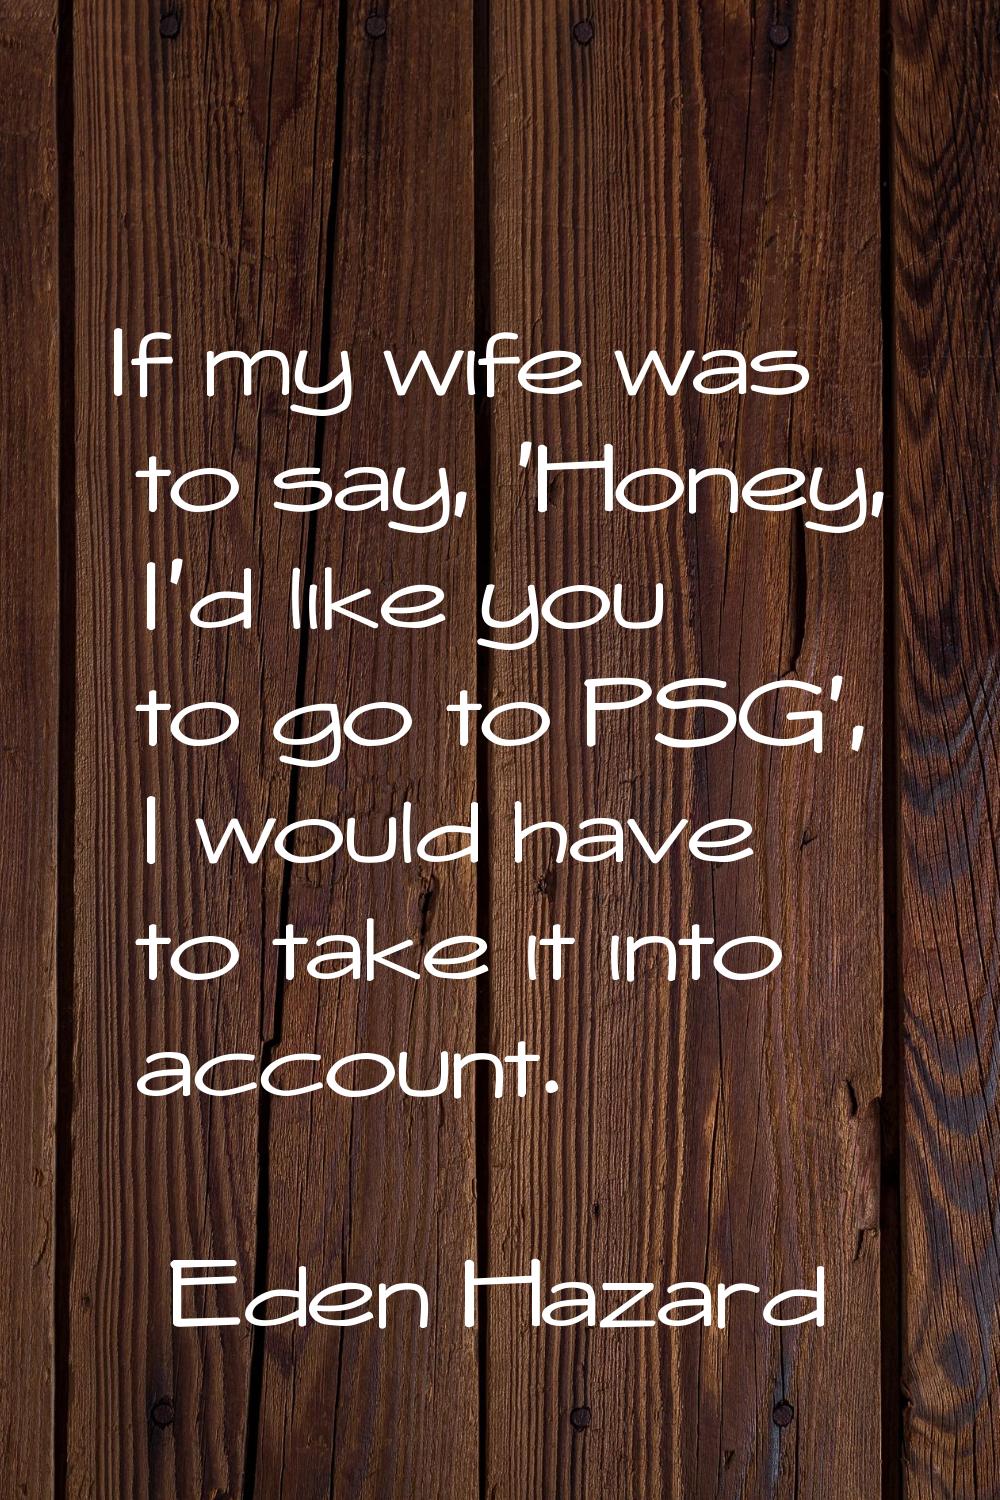 If my wife was to say, 'Honey, I'd like you to go to PSG', I would have to take it into account.